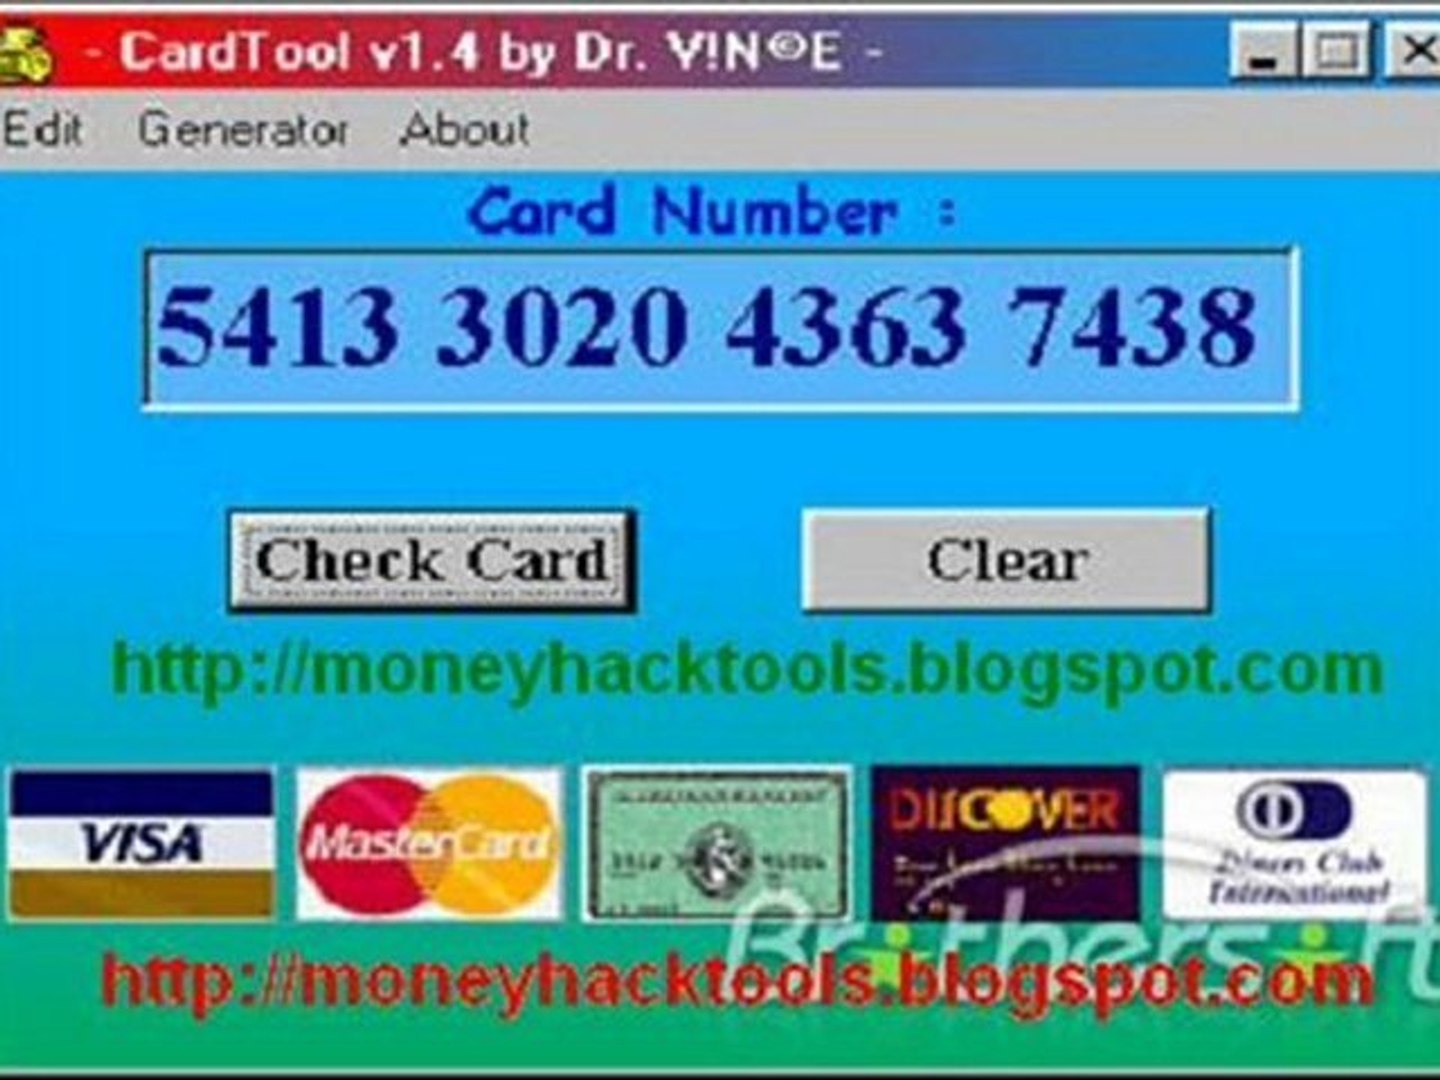 Credit Card Tools V1 4 Checks Credit Card Numbers For Validity Video Dailymotion